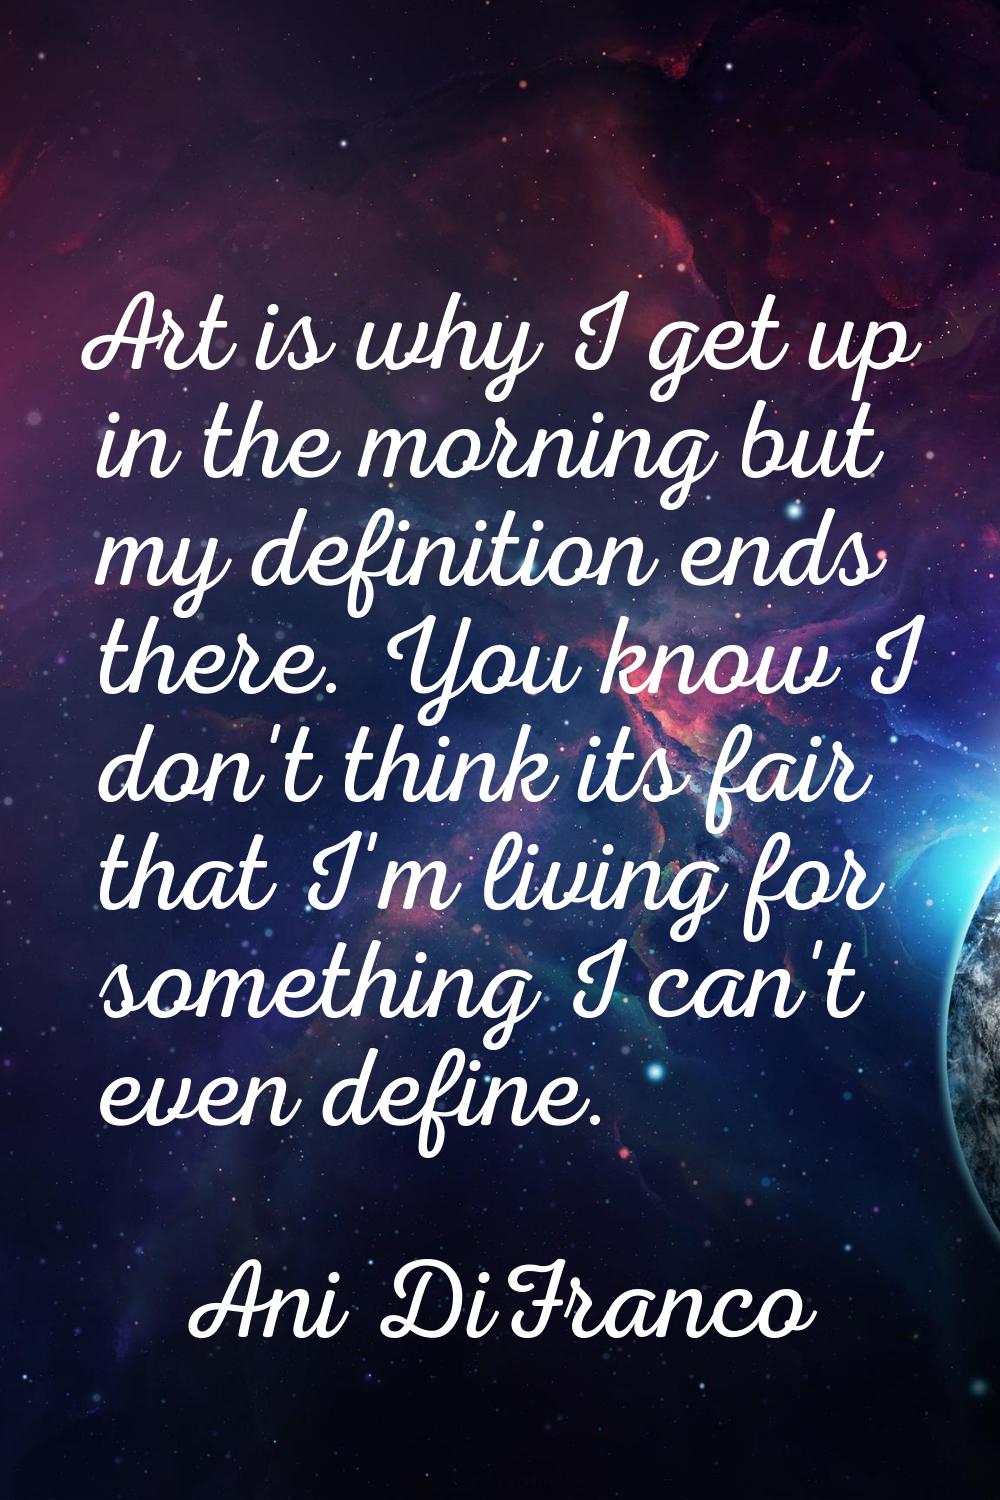 Art is why I get up in the morning but my definition ends there. You know I don't think its fair th